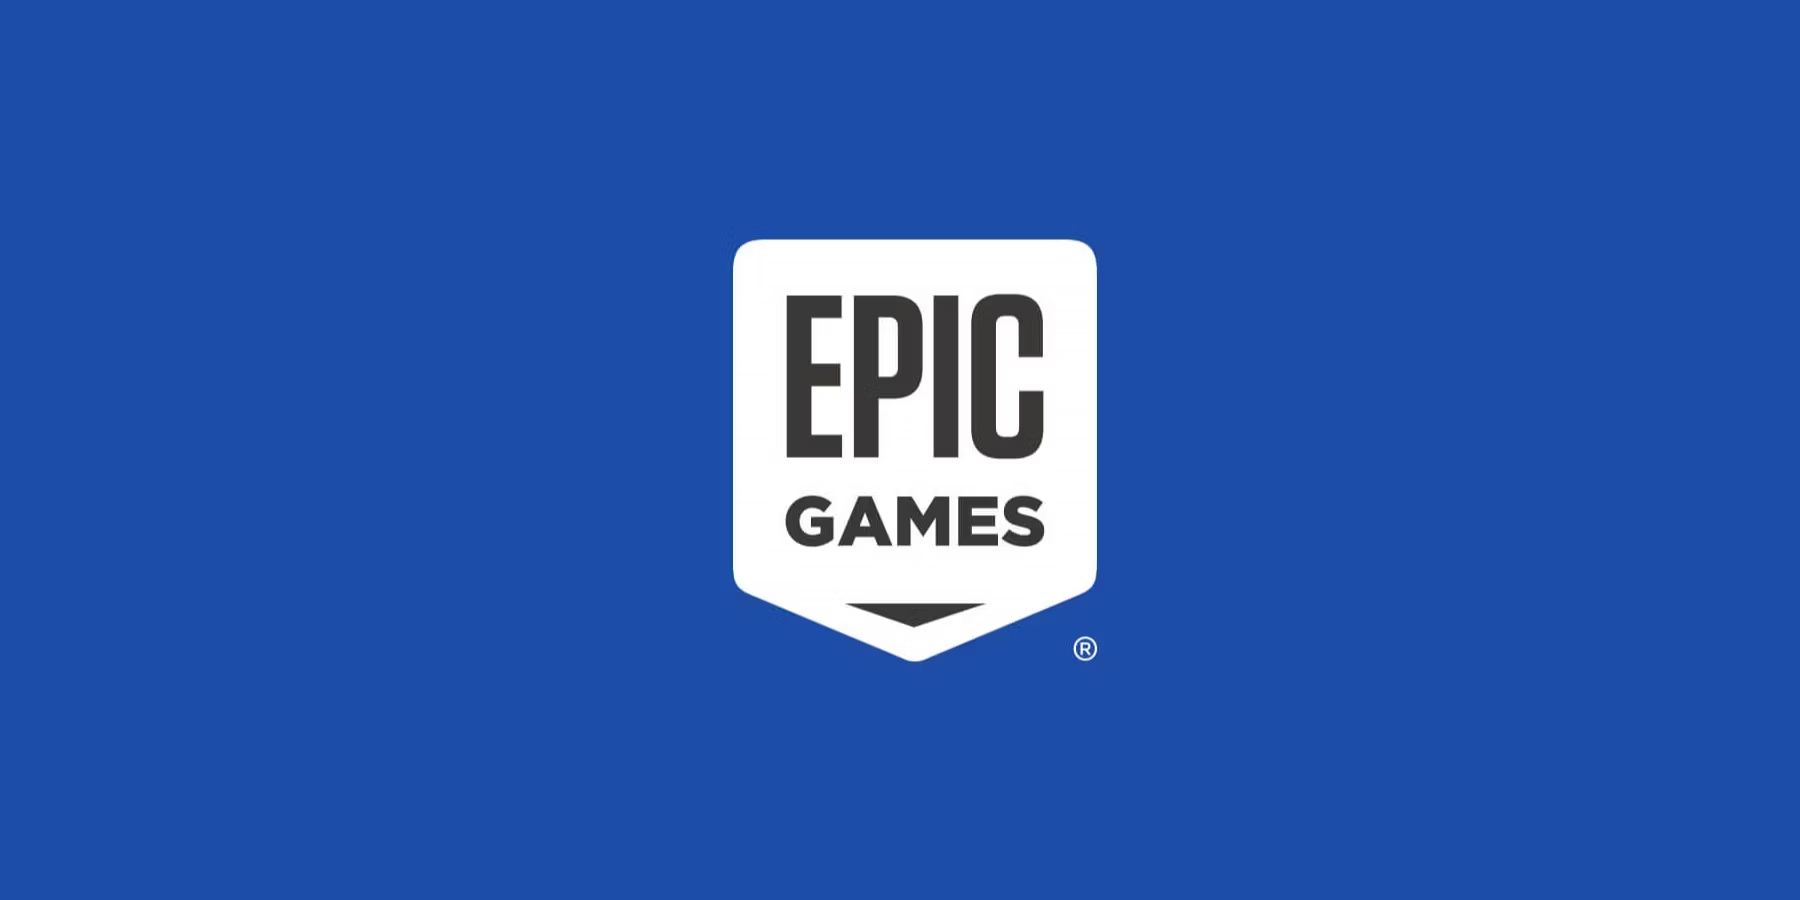 epic-games-logo-blue-background-free-games-store